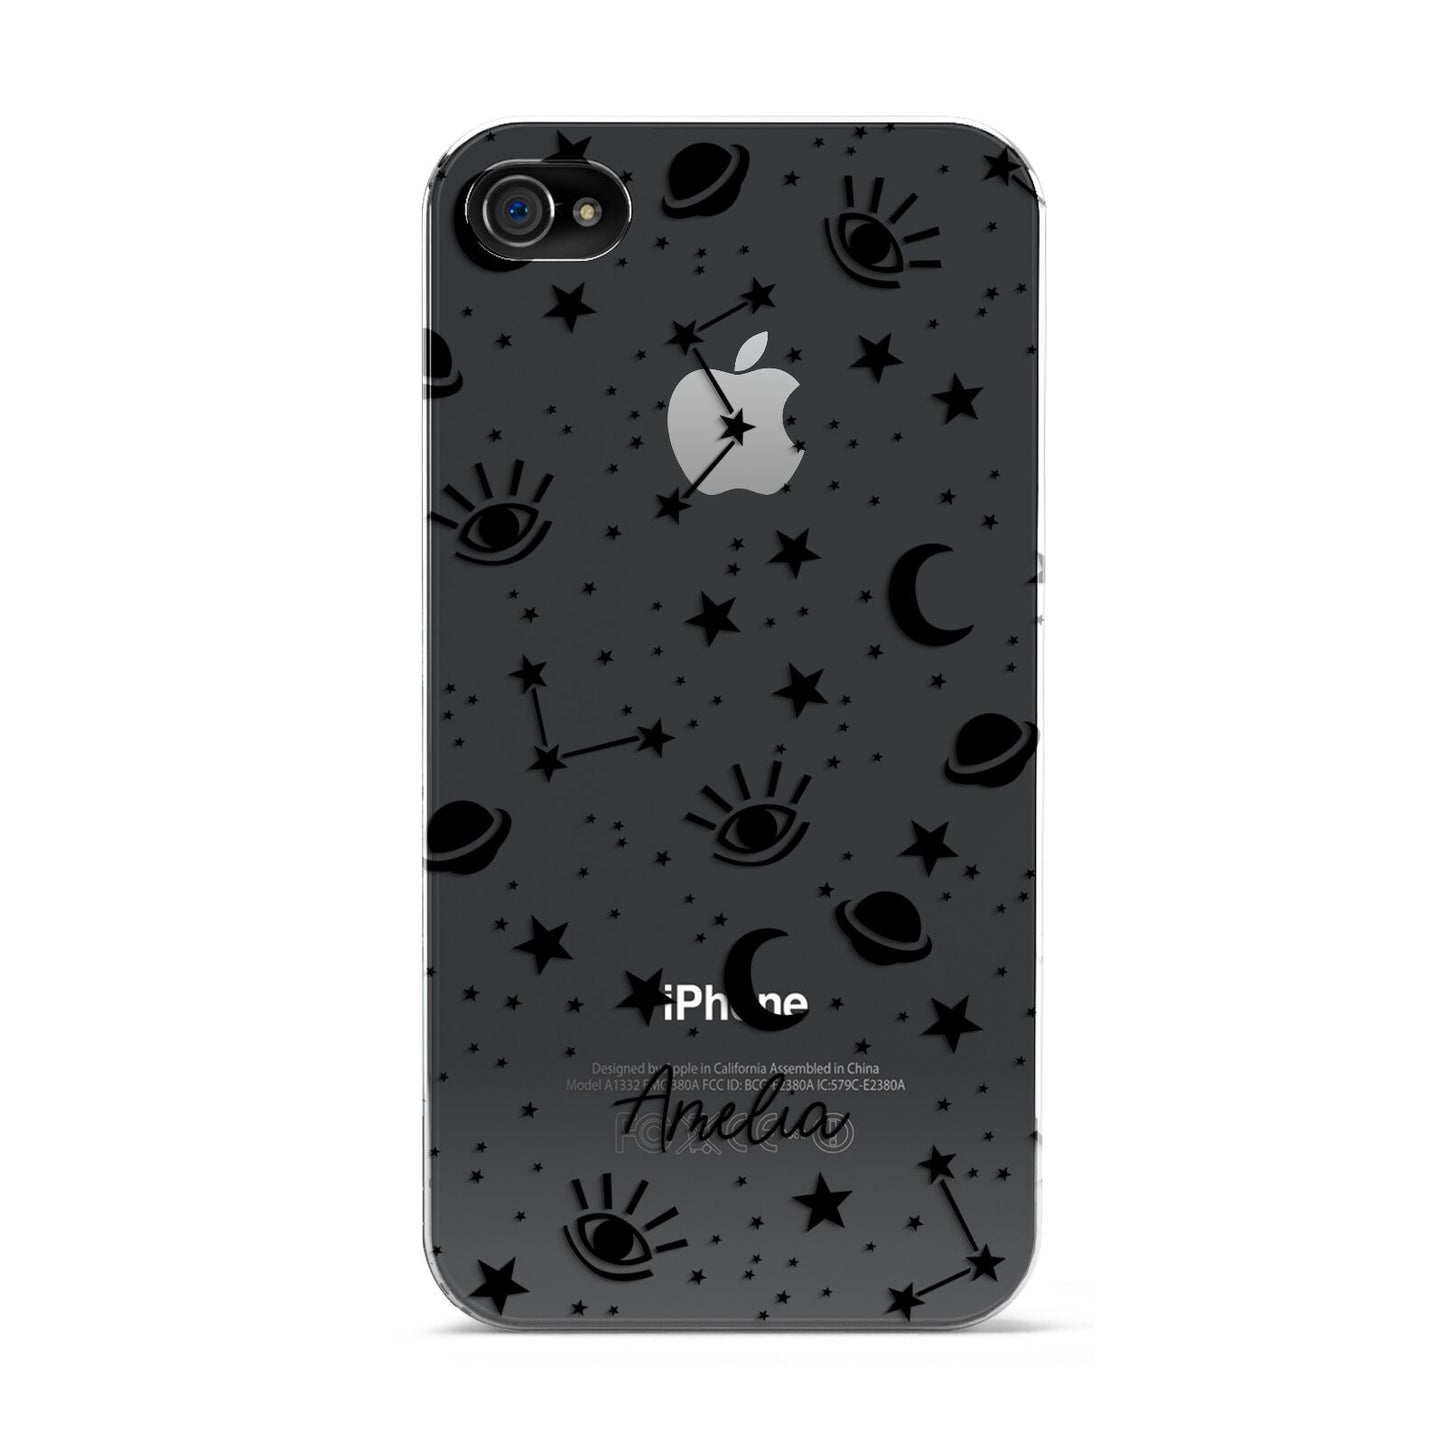 Monochrome Zodiac Constellations with Name Apple iPhone 4s Case